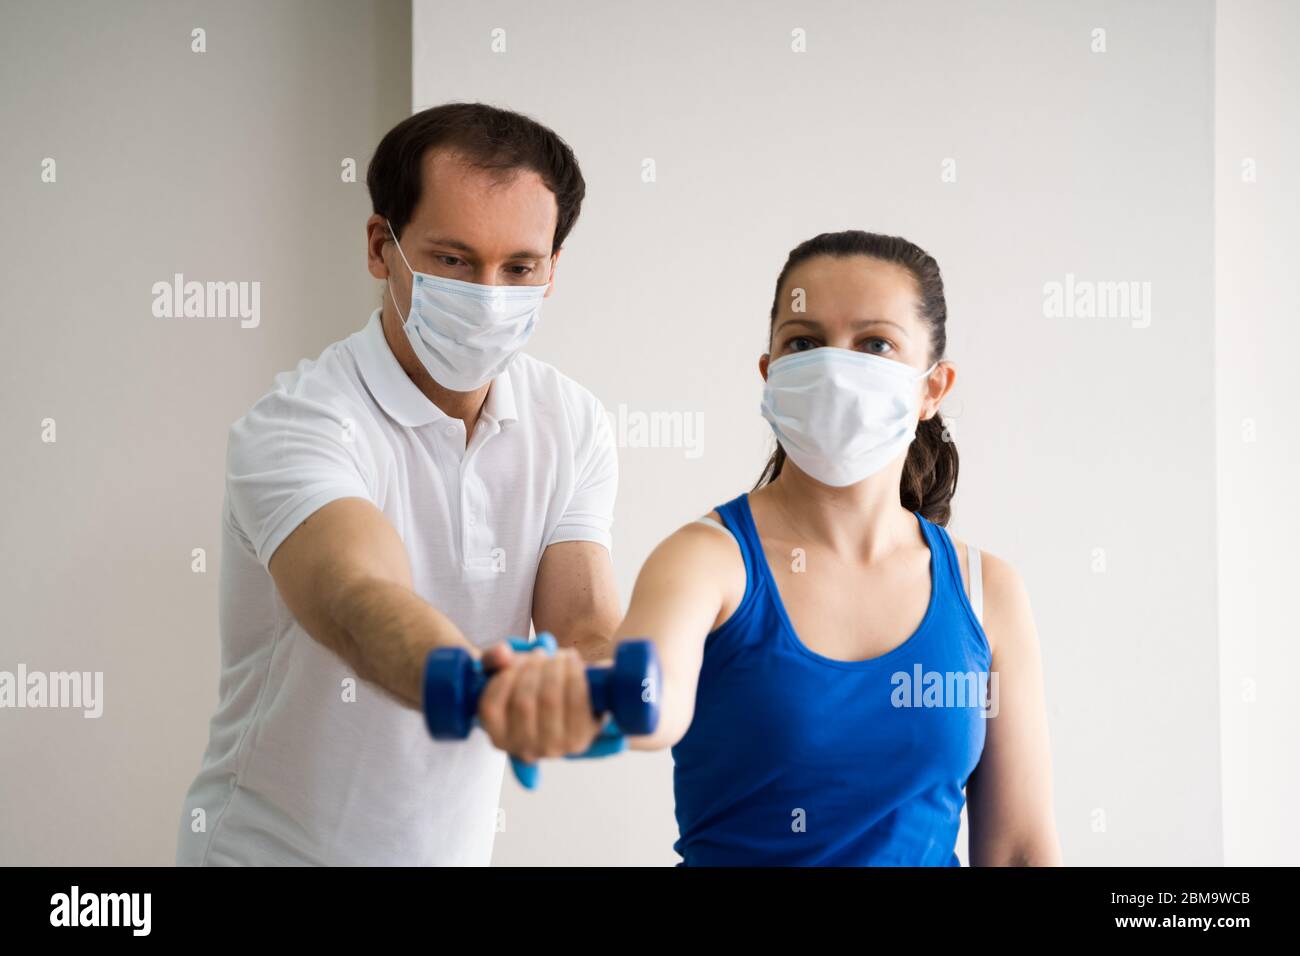 Physio Therapy Physical Trainer in Face Mask Foto Stock